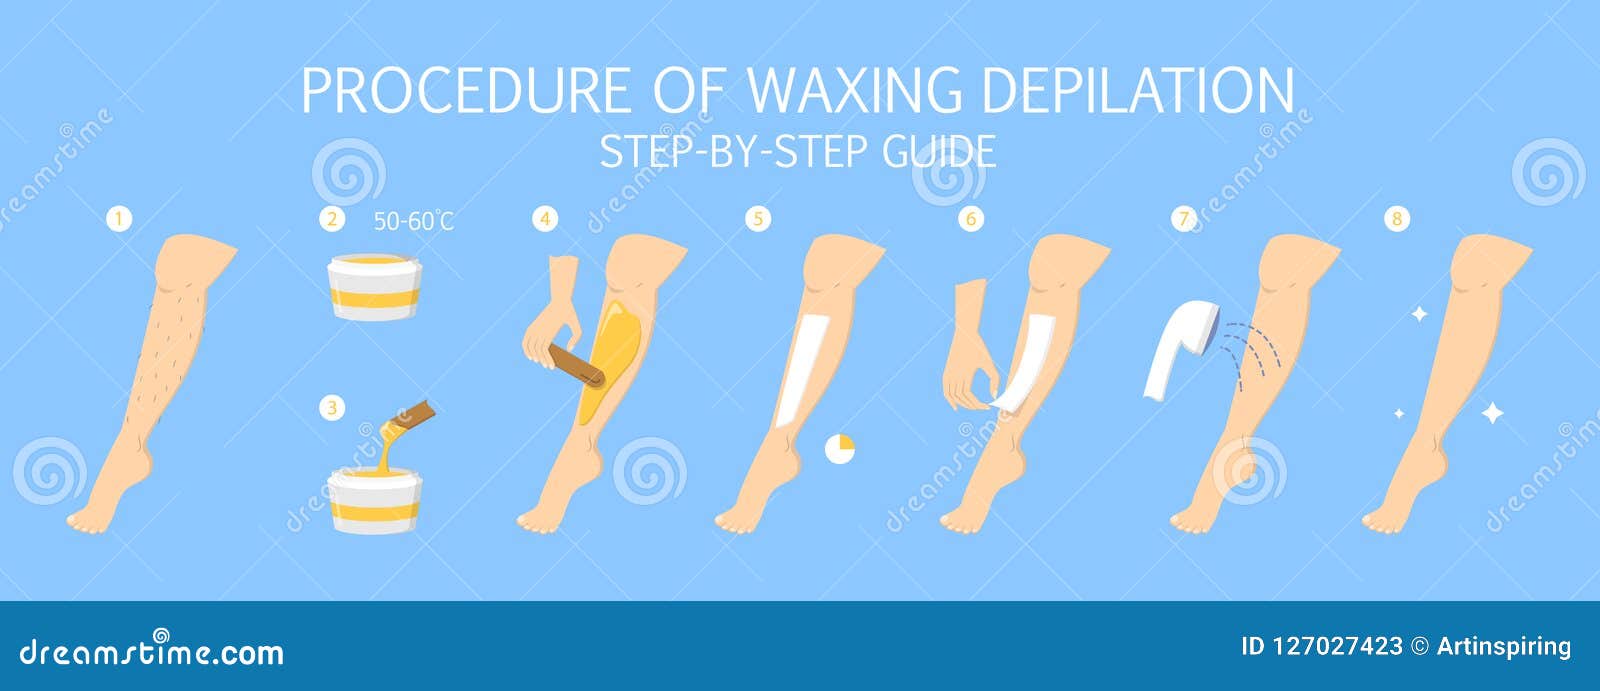 6. Blue Wax Hair Removal Step by Step - wide 1